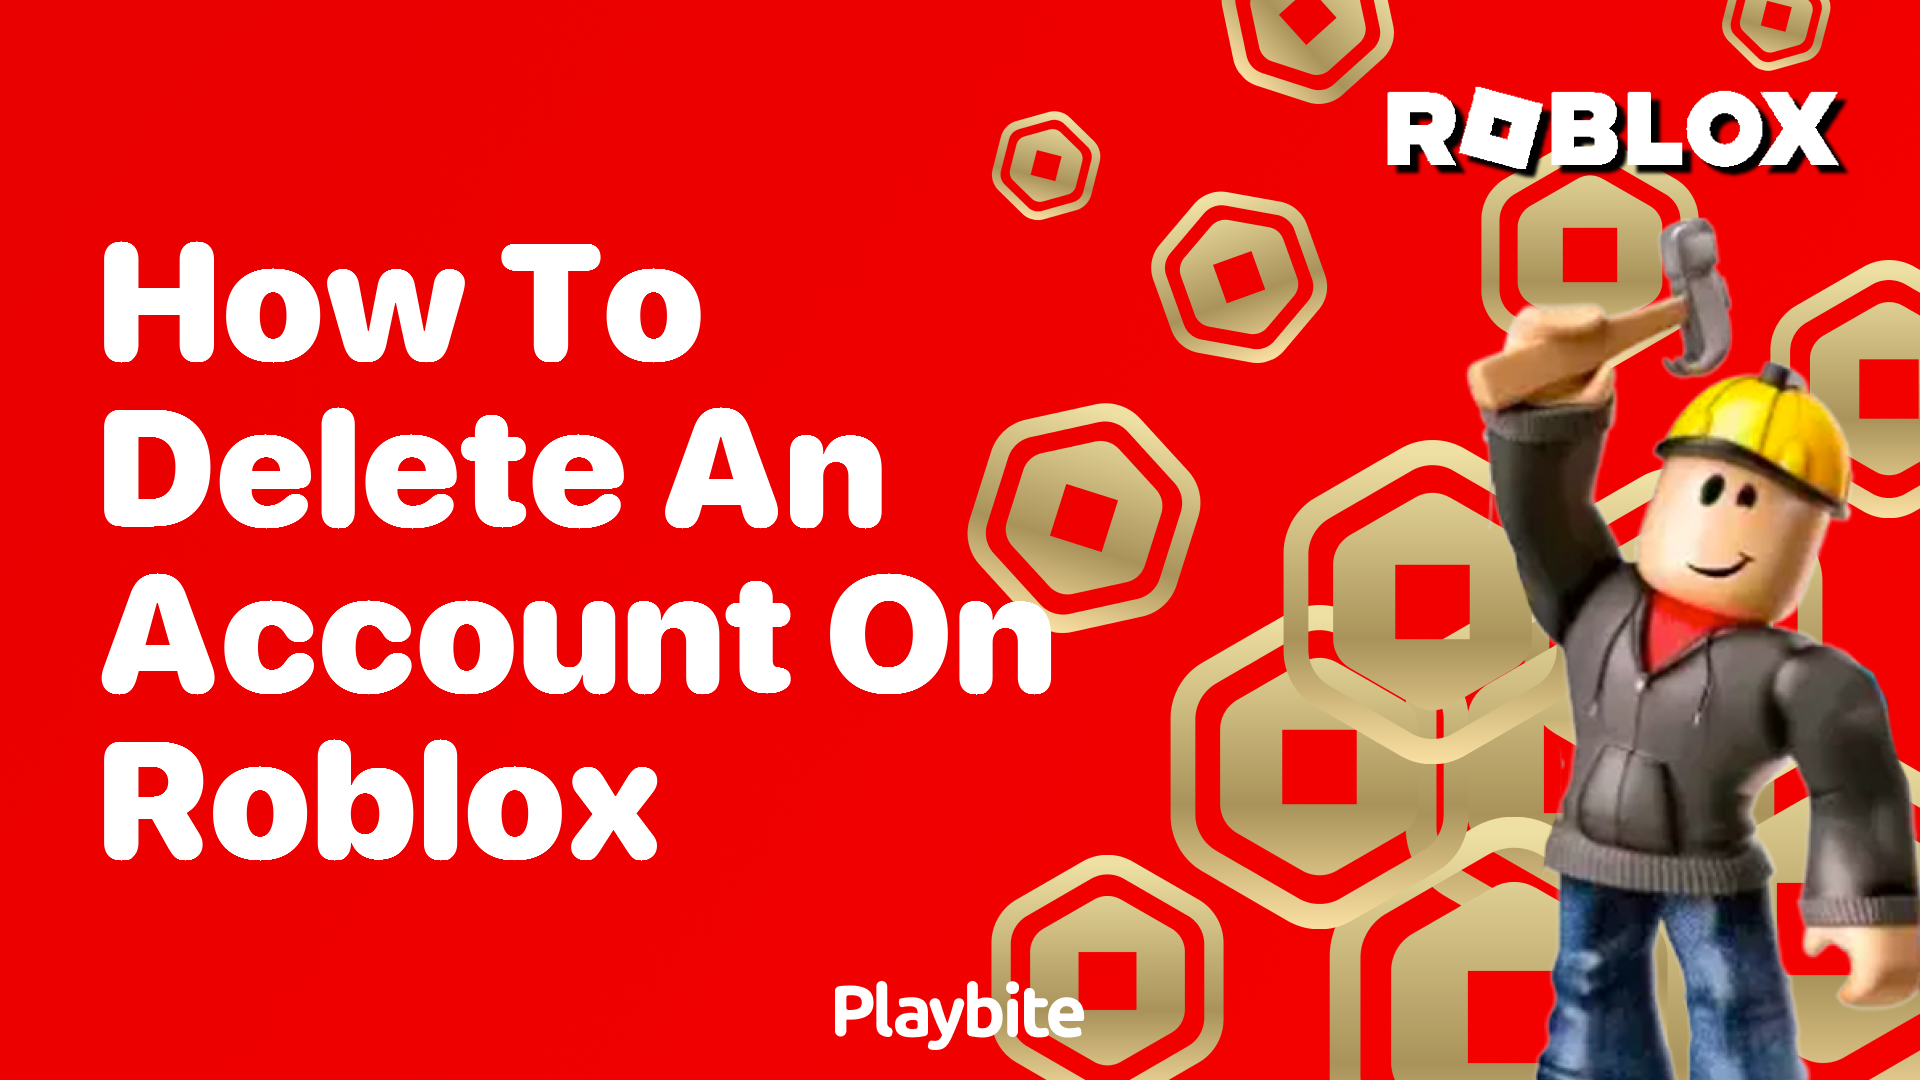 How to Delete an Account on Roblox: A Simple Guide